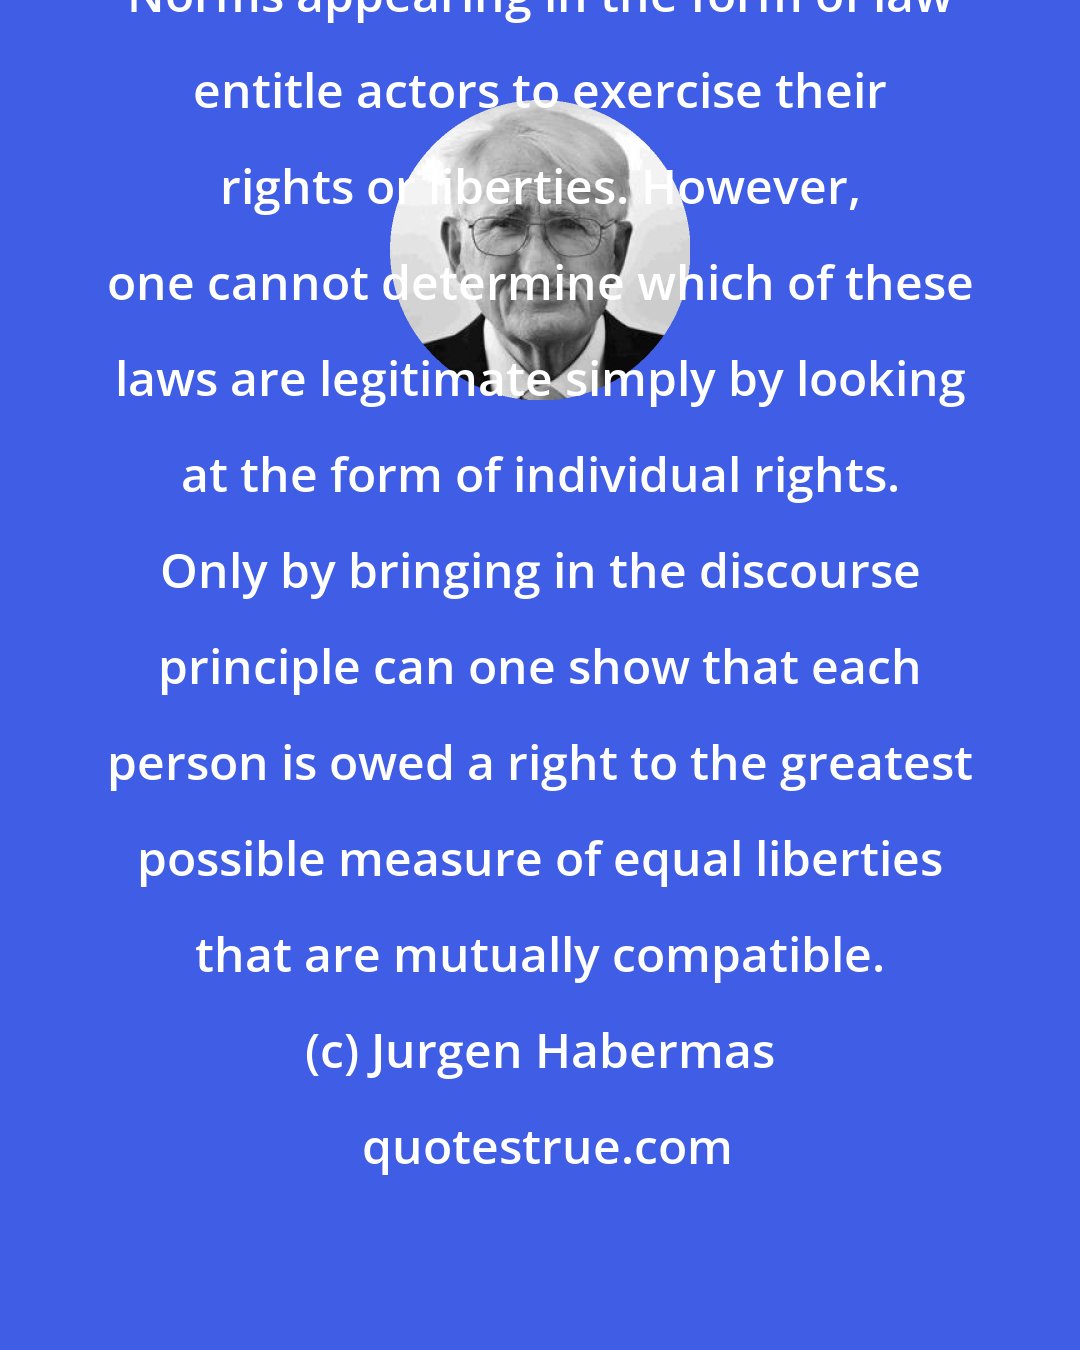 Jurgen Habermas: Norms appearing in the form of law entitle actors to exercise their rights or liberties. However, one cannot determine which of these laws are legitimate simply by looking at the form of individual rights. Only by bringing in the discourse principle can one show that each person is owed a right to the greatest possible measure of equal liberties that are mutually compatible.